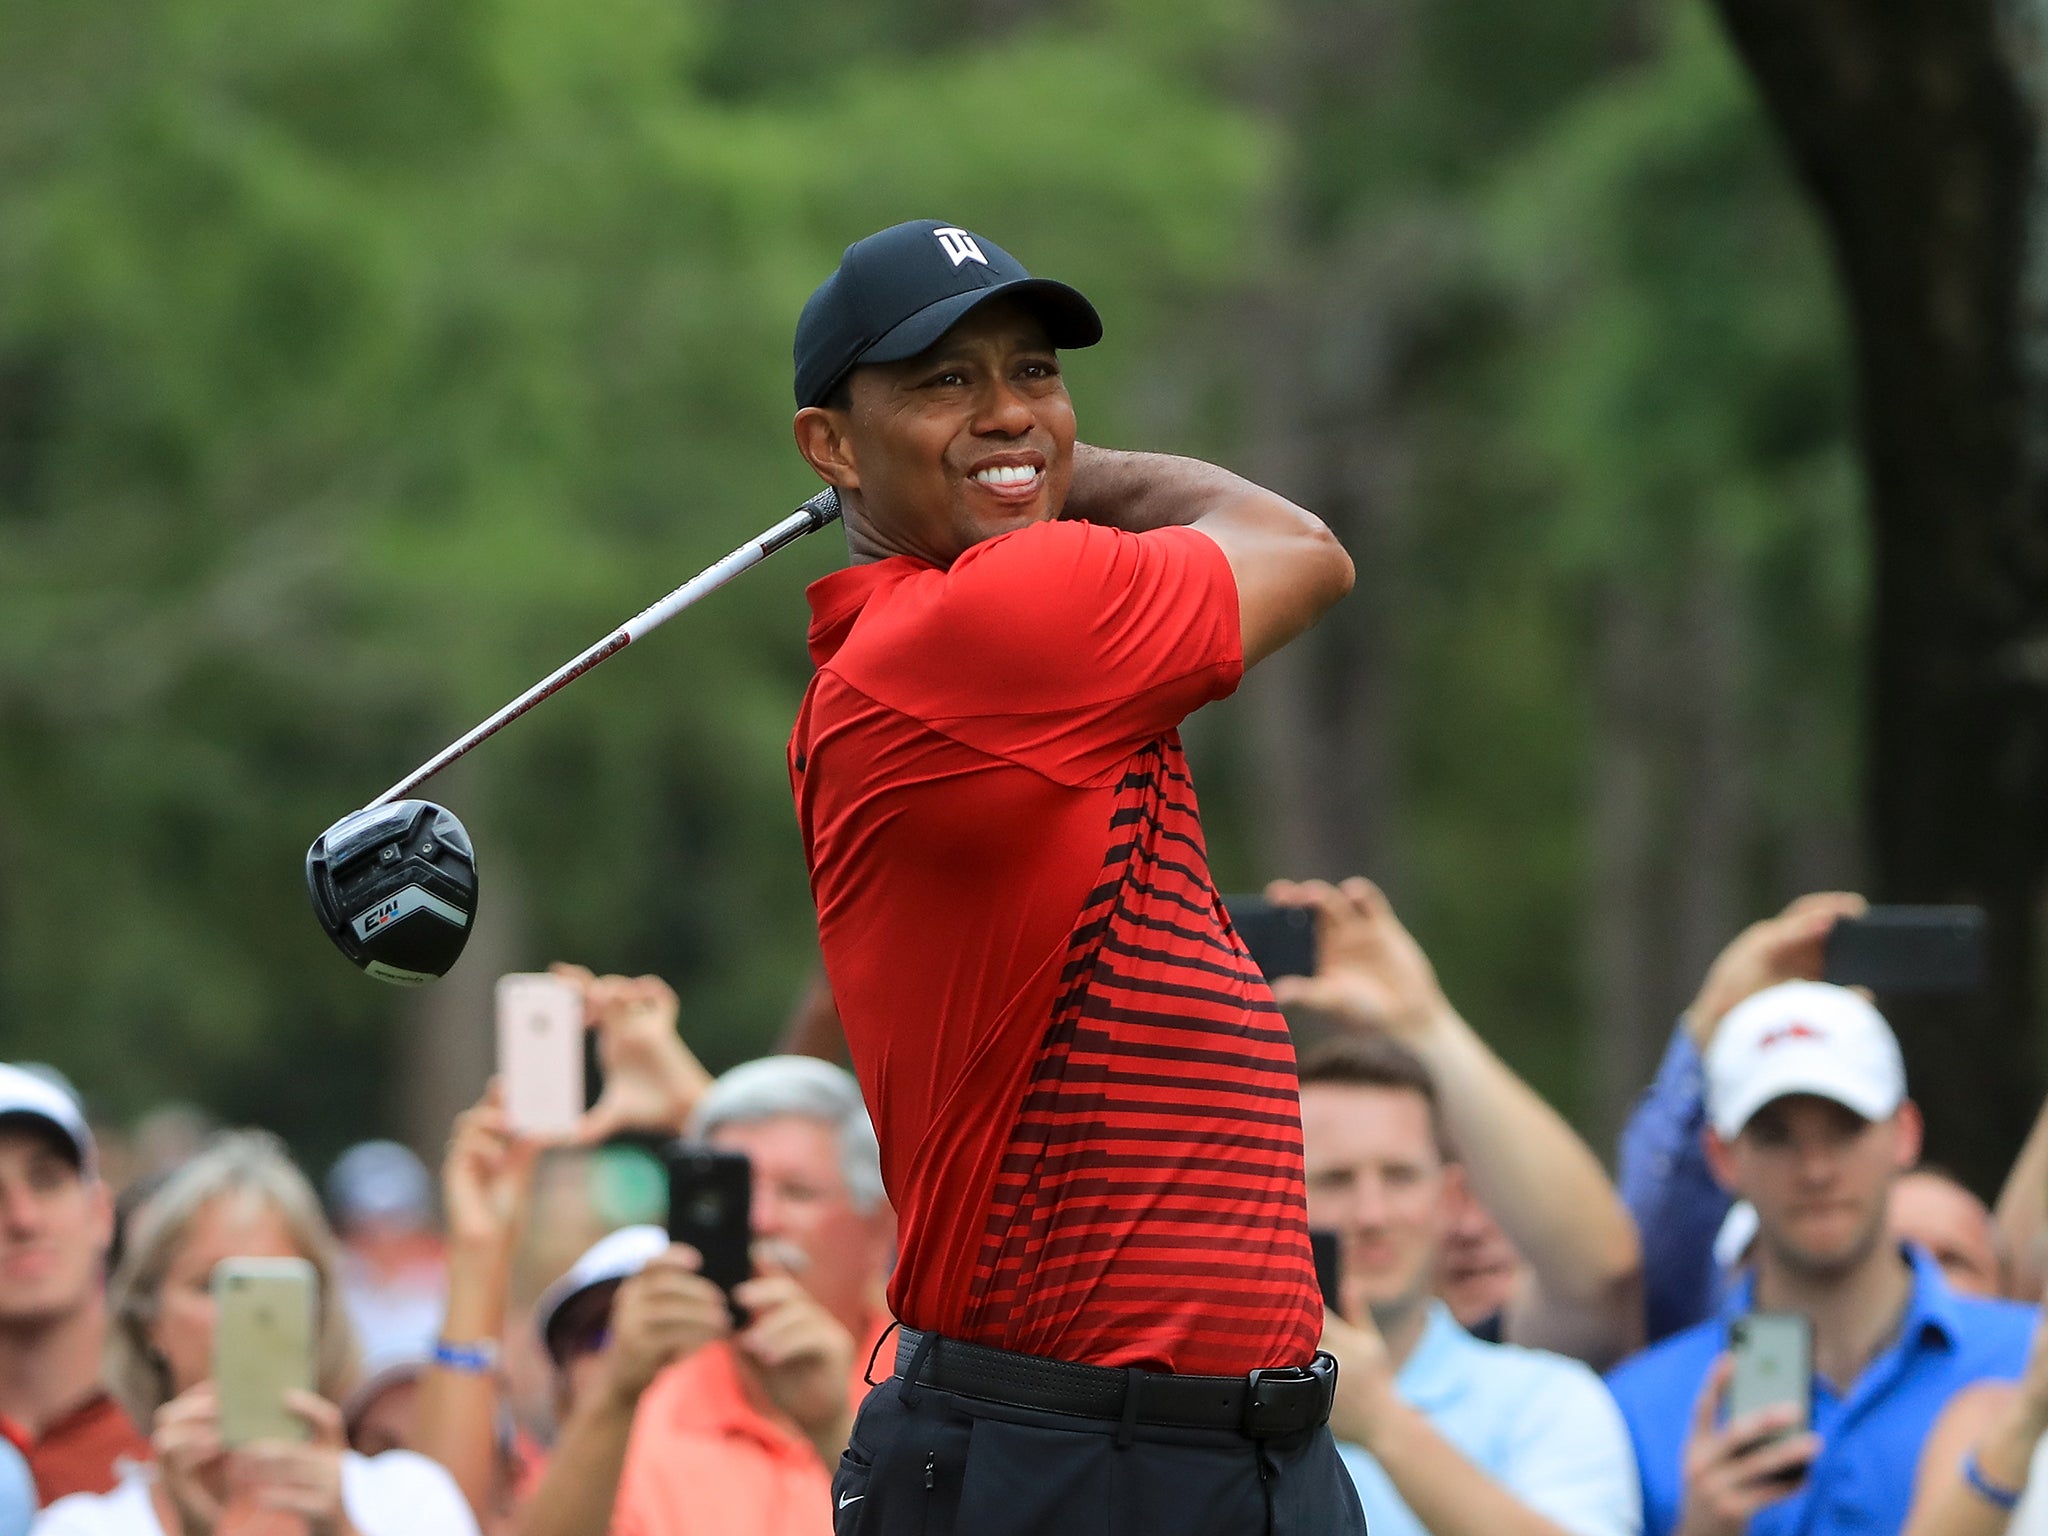 Woods is currently ranked 104th in the world